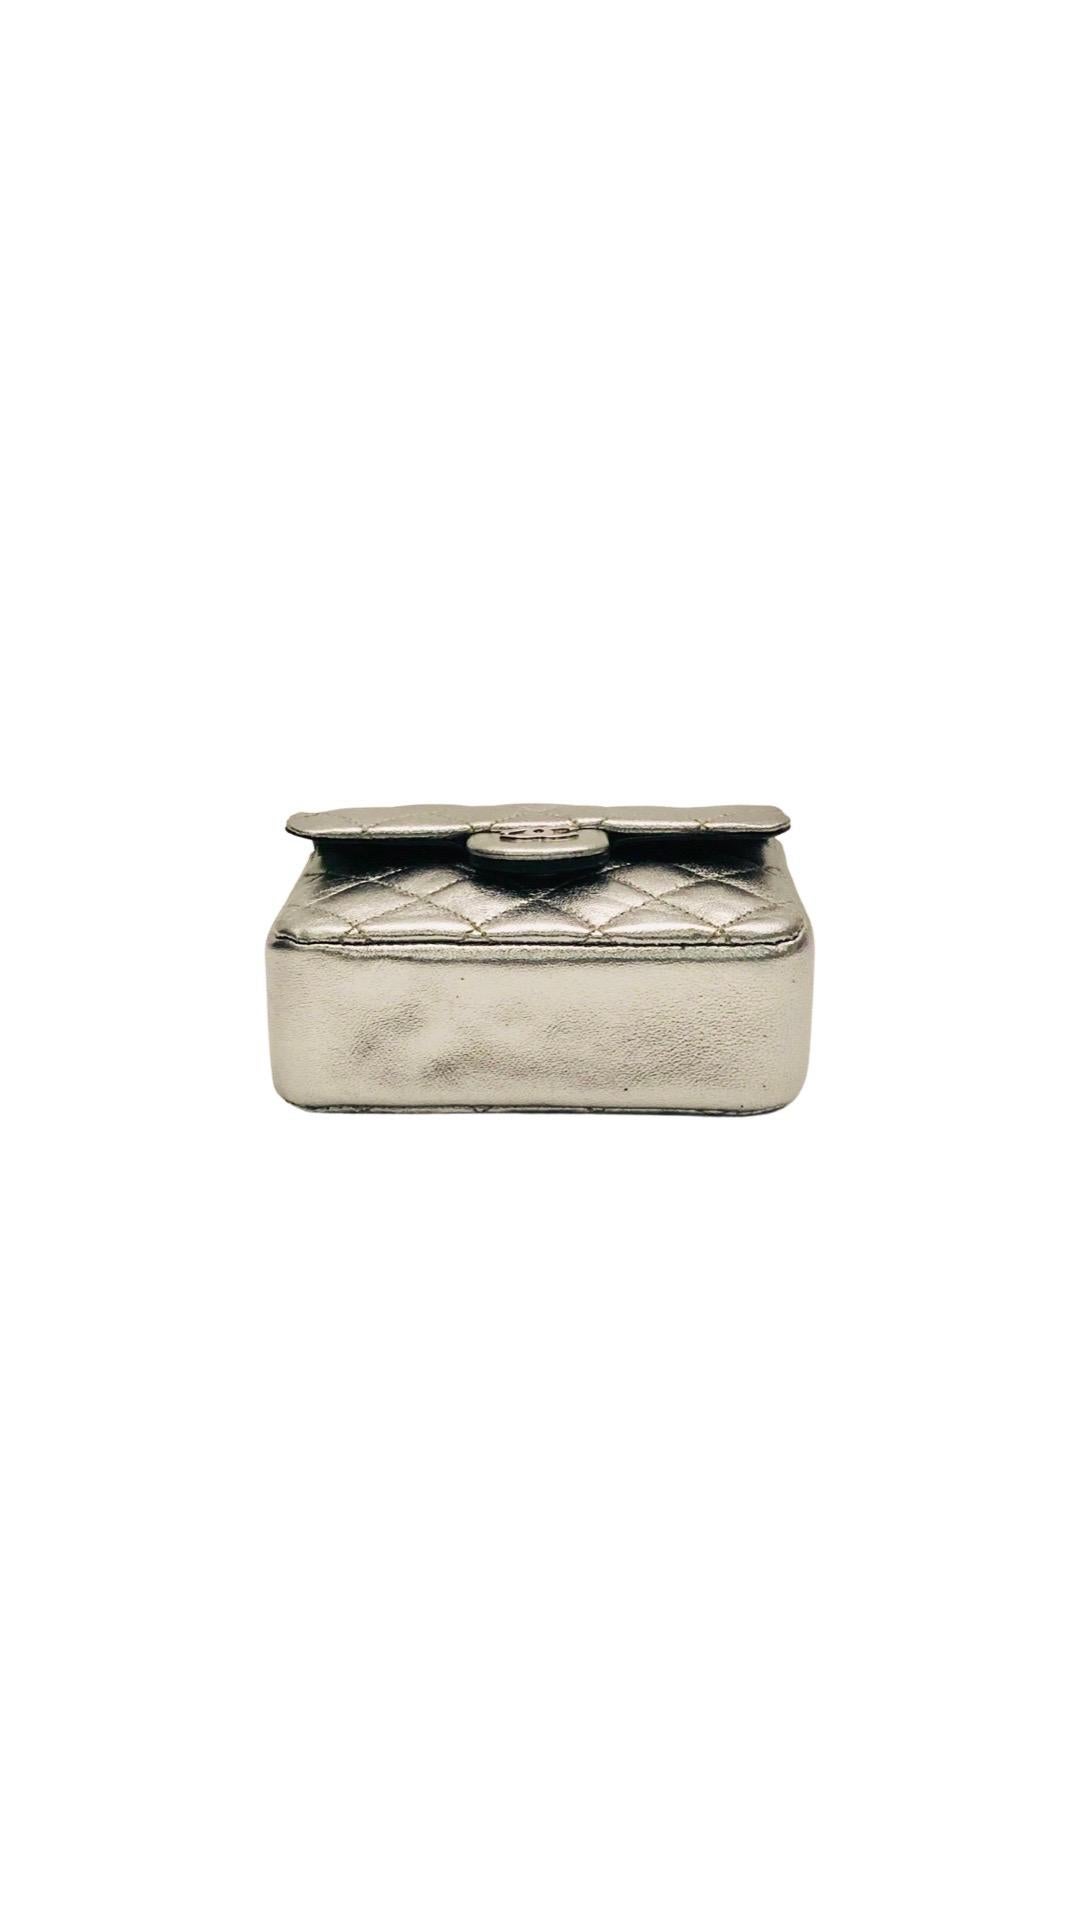 - Unused Vintage Chanel silver metallic leather micro mini chain belt bag from year 1997 to 1999 collection (Serial 5). 

- Flap and push button closure. 

- Length: 3.75 inches.
  Height: 3 inches. 
  Width: 1.5 inches. 
 
- Comes with authenticity